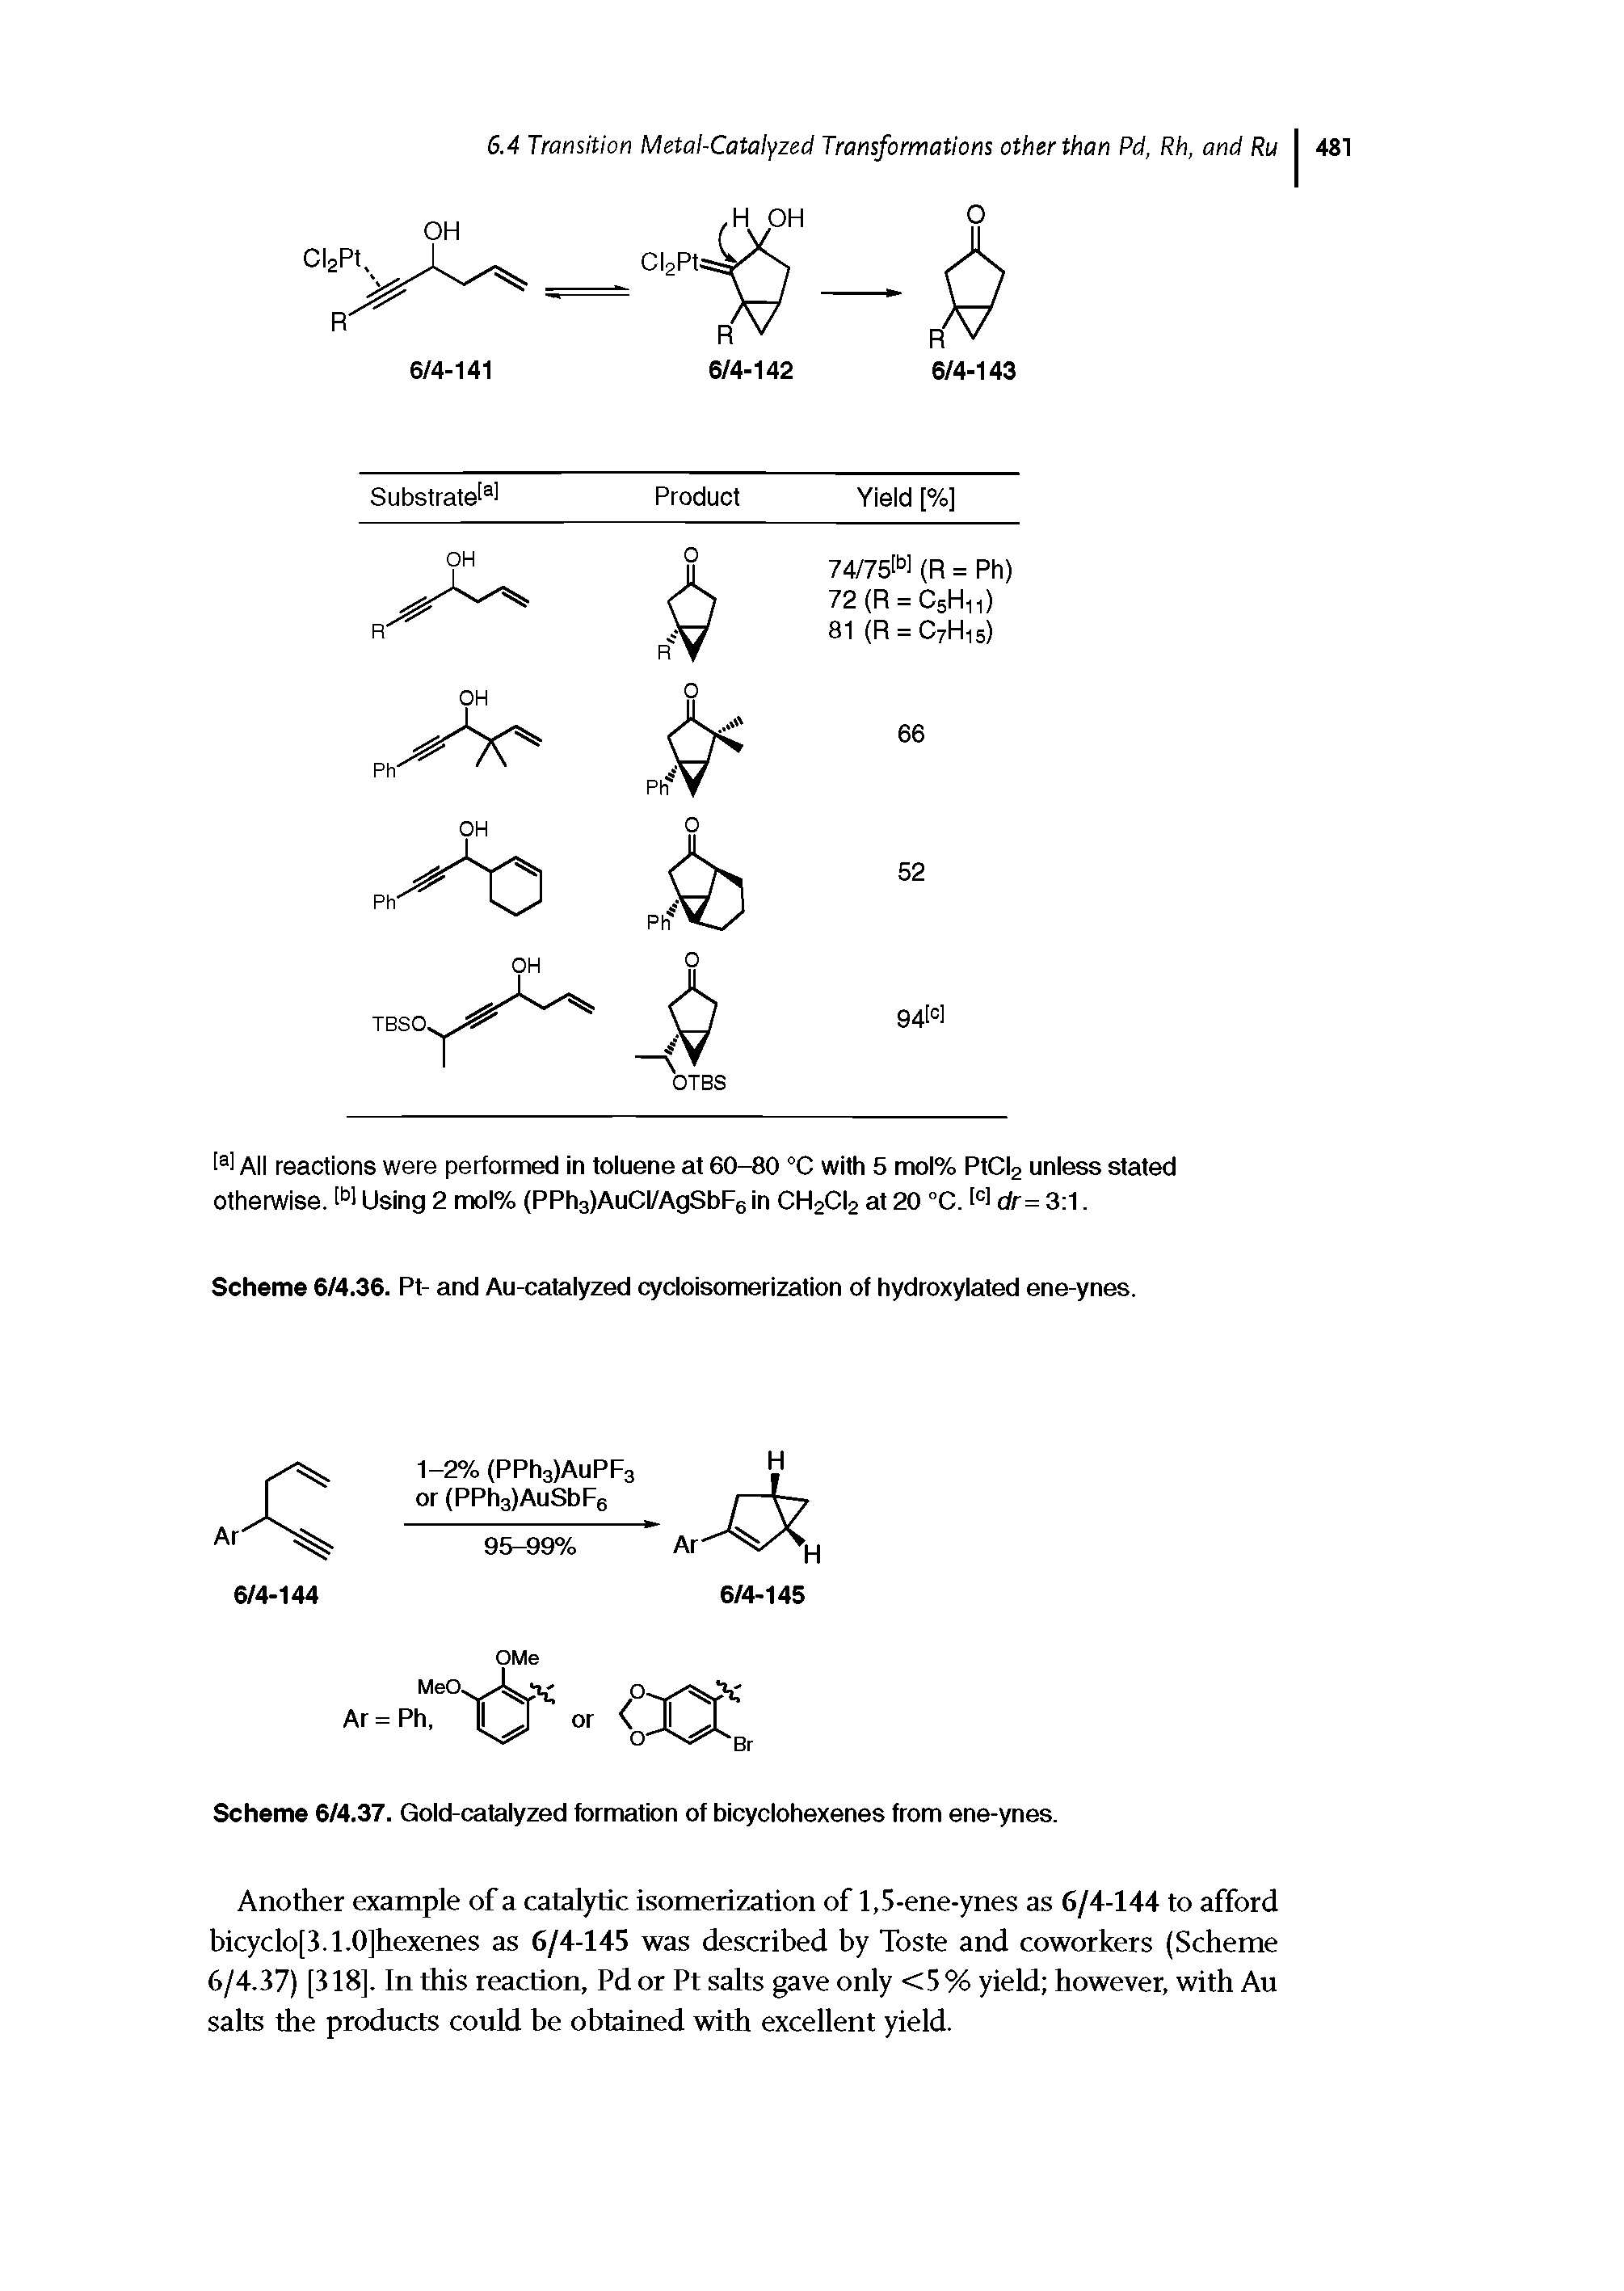 Scheme 6/4.37. Gold-catalyzed formation of bicyclohexenes from ene-ynes.